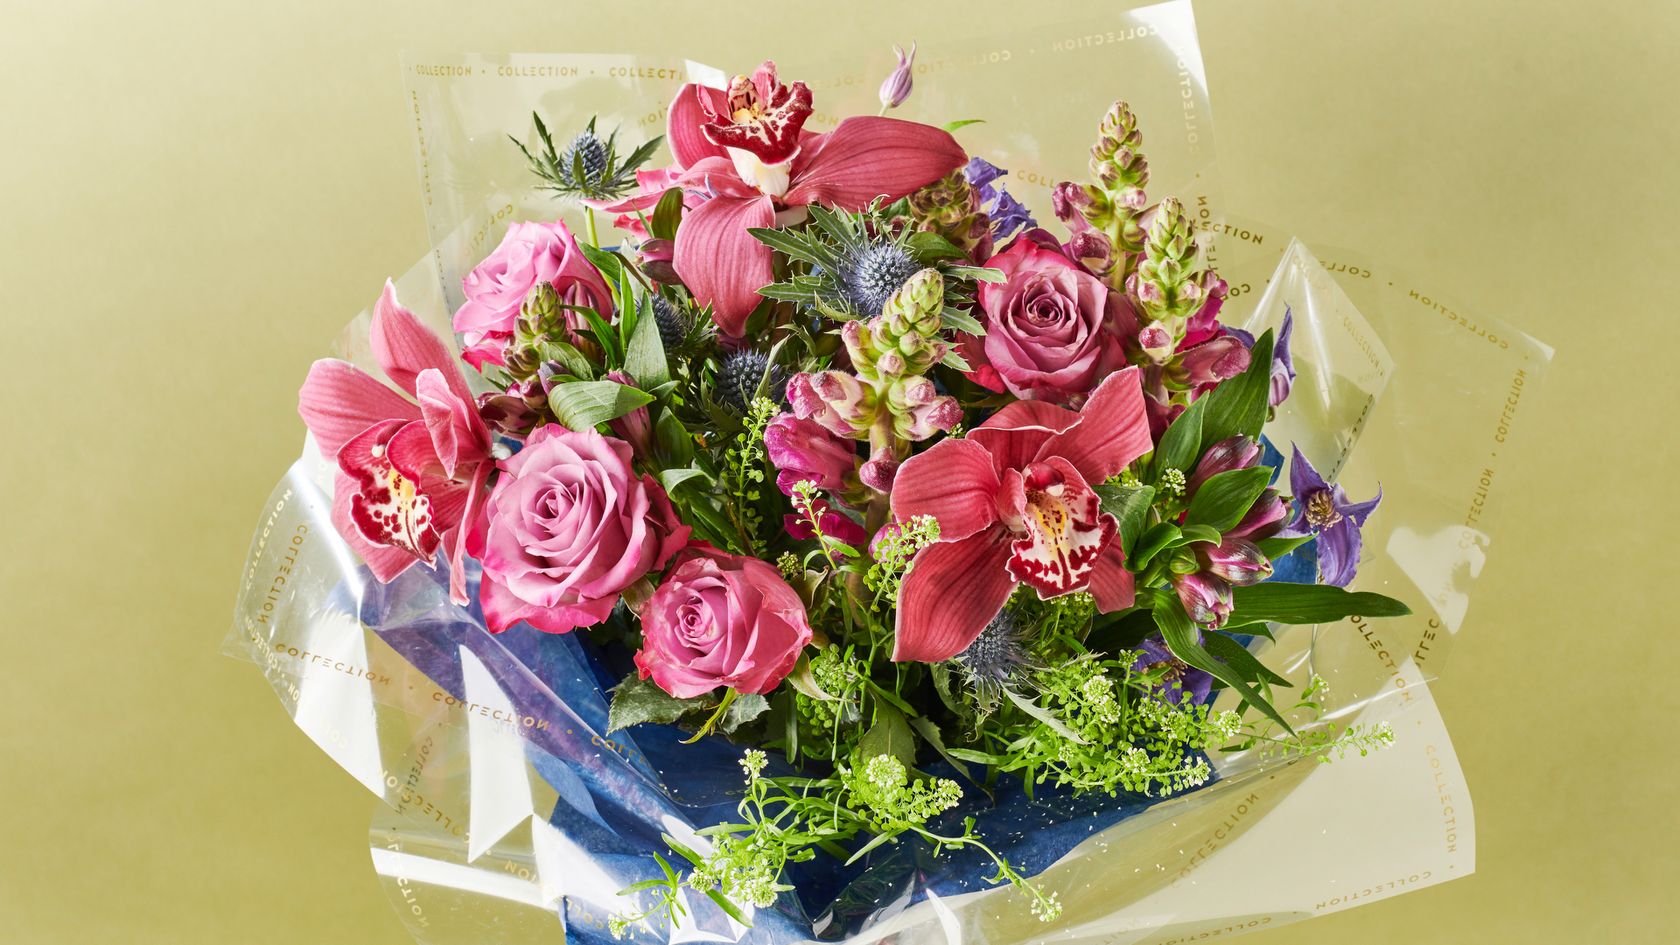 We ordered Valentine's Day flowers from eight of the best online flower